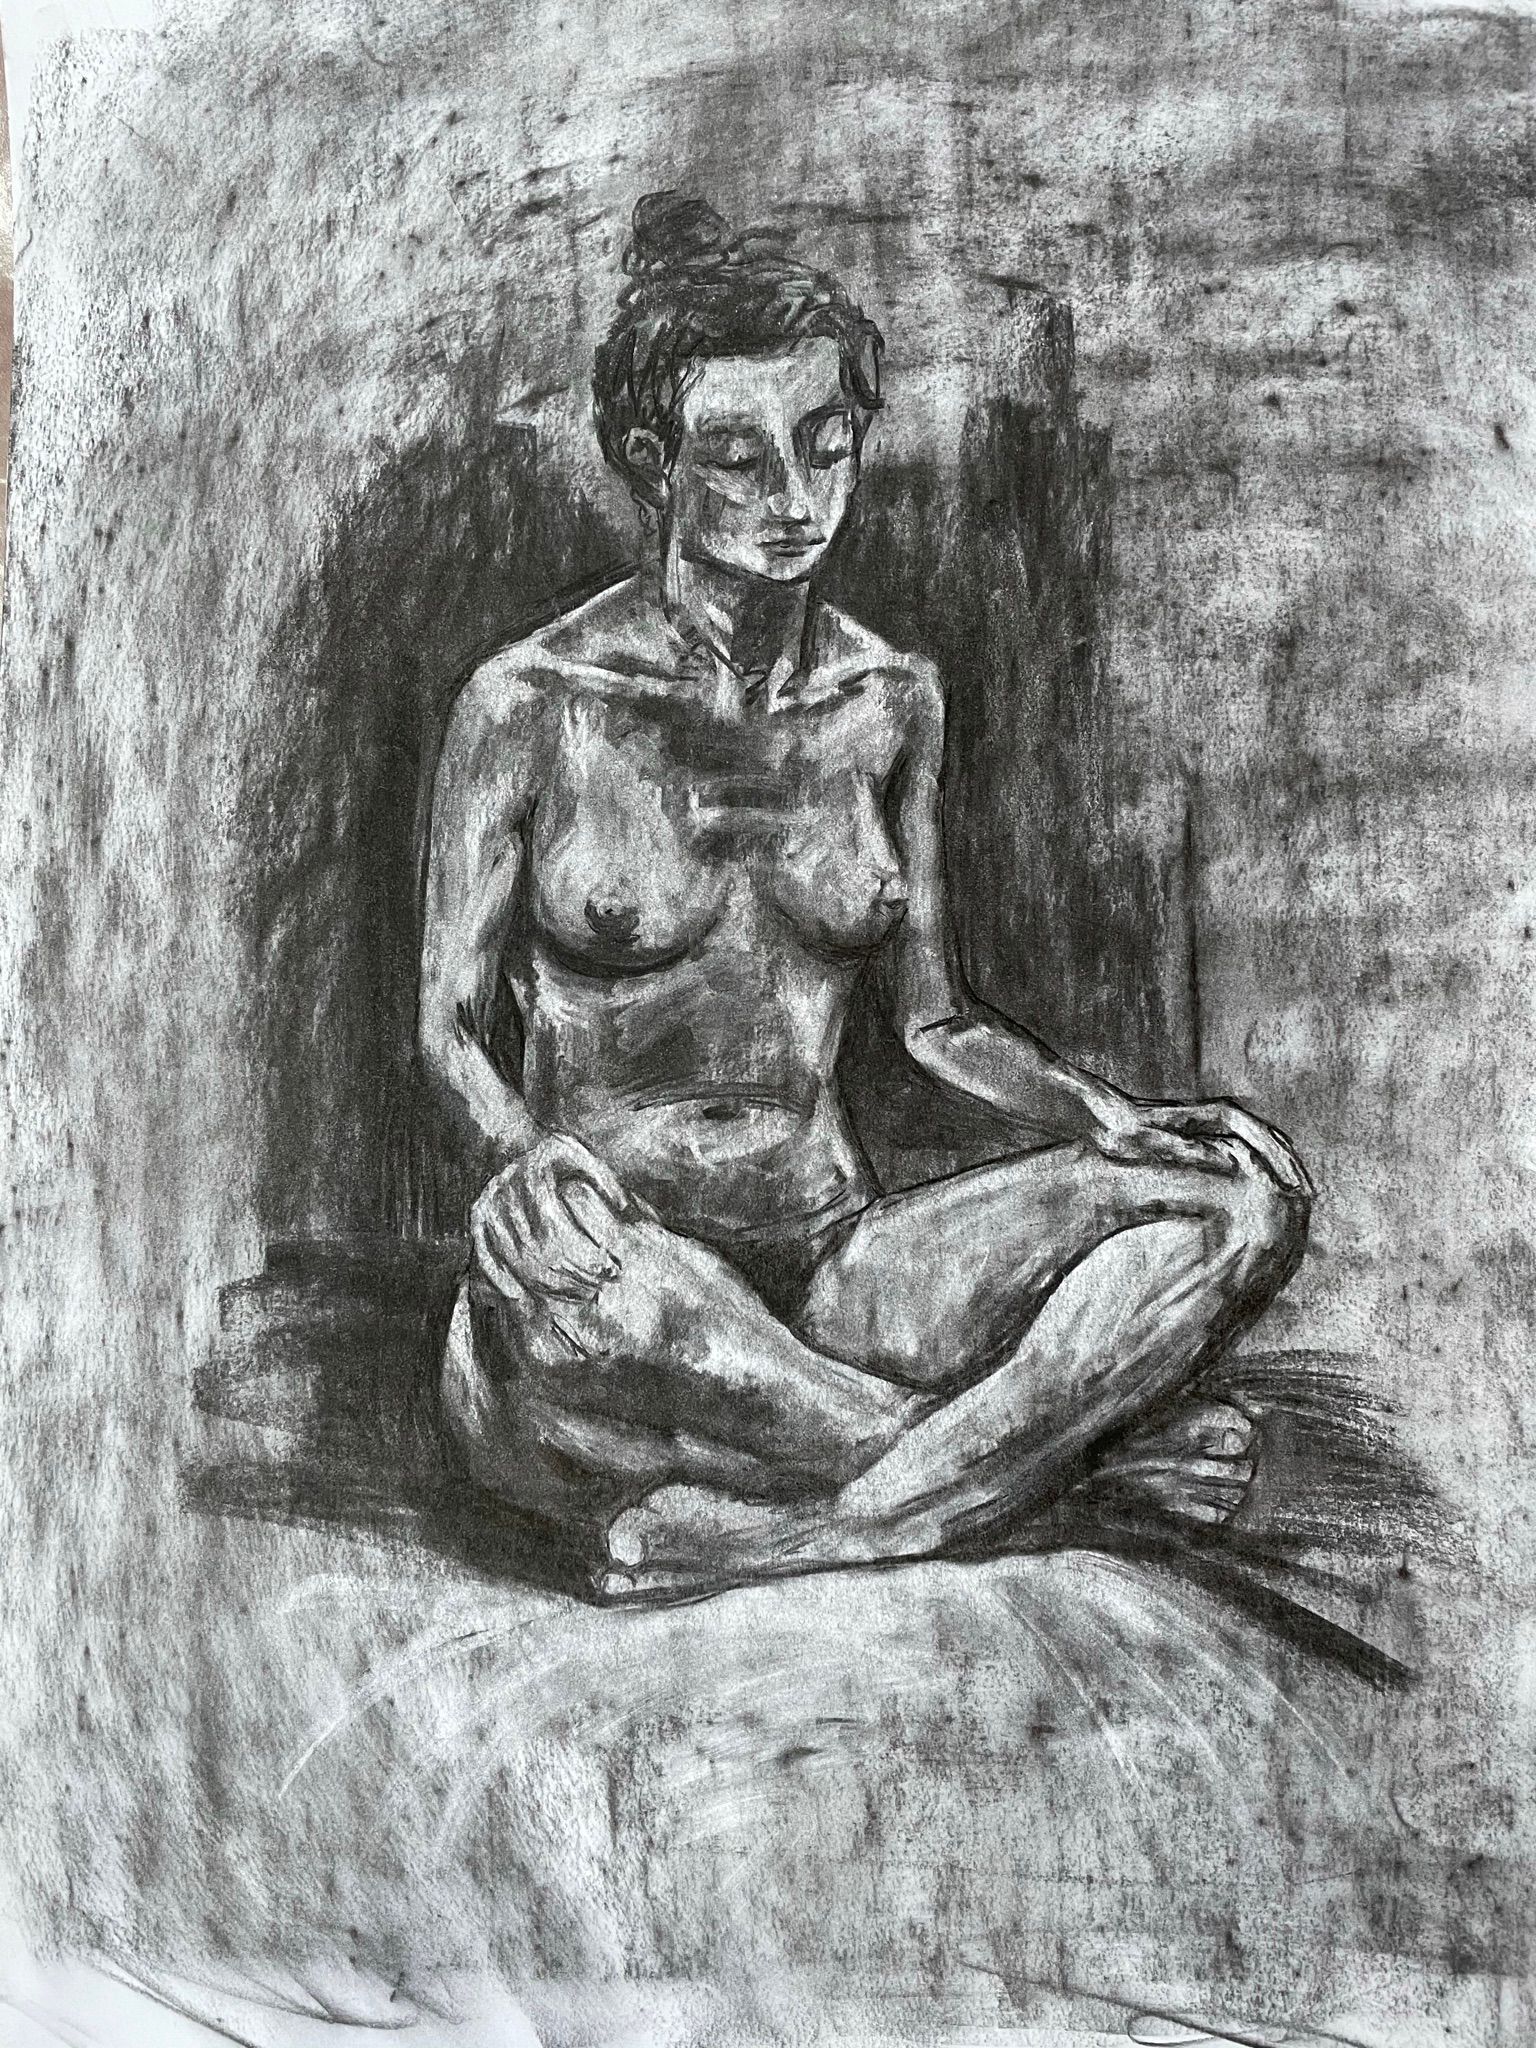 Julie Swinsco, Artist, based in Stratford-upon-Avon - Picture shown is an A1 life drawing - a femail nude, charcoal